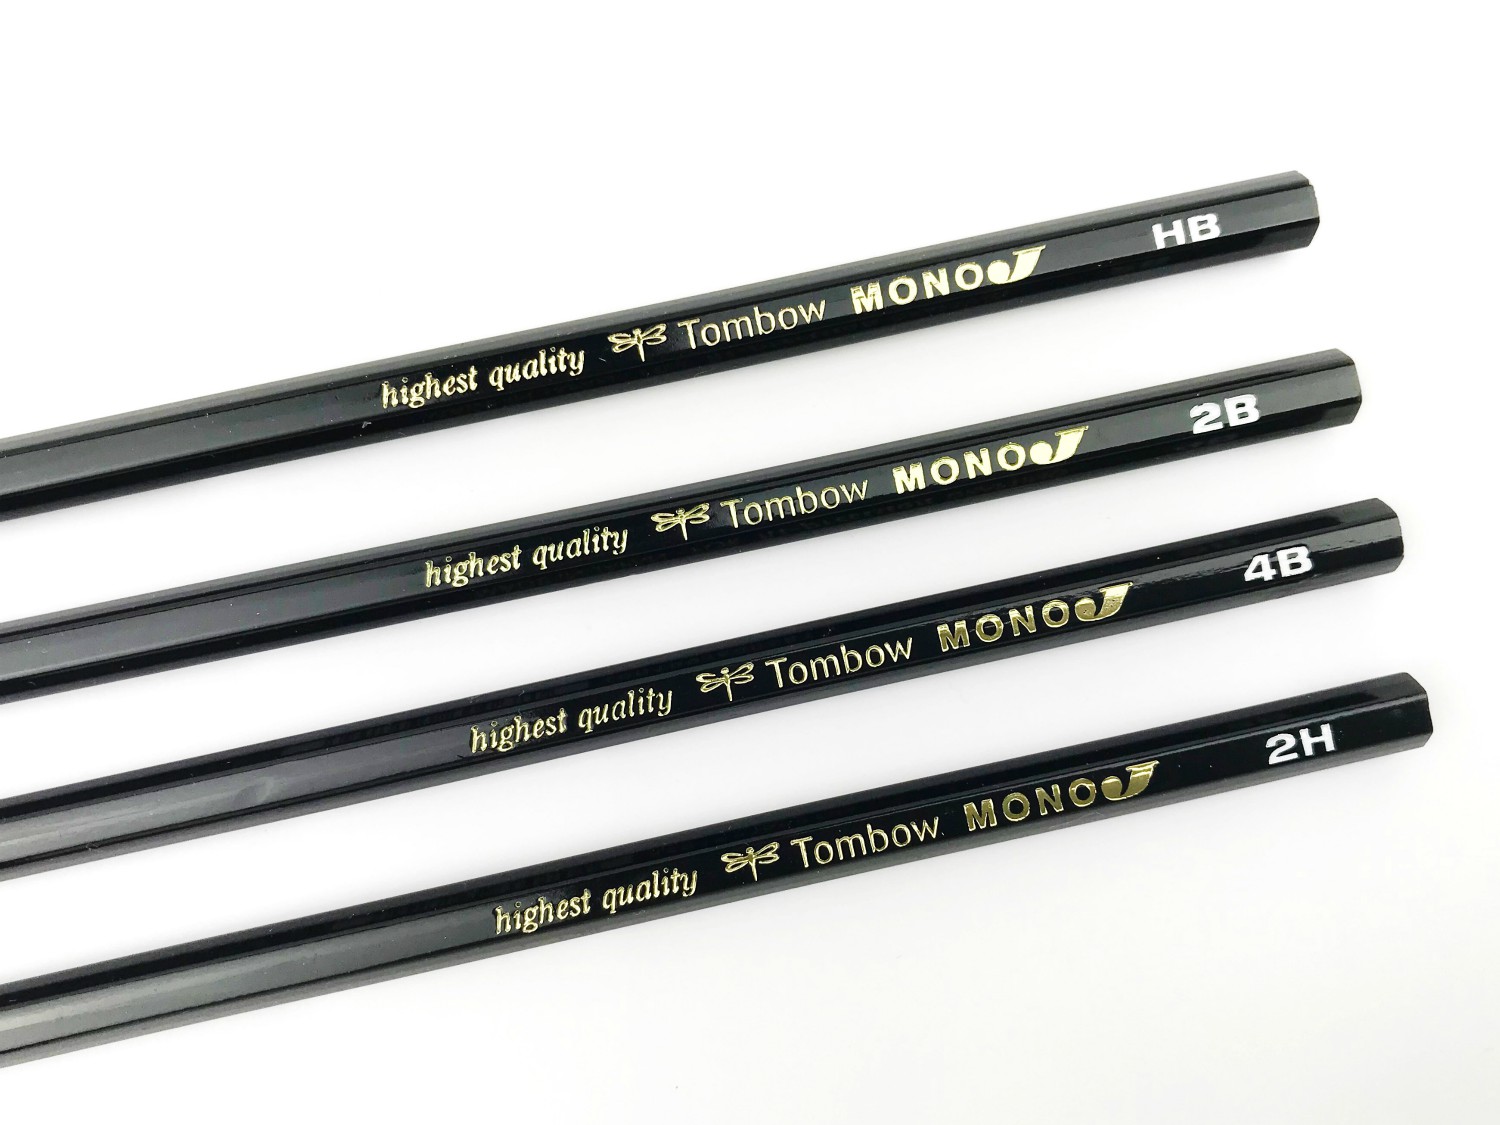 Everything You Need To Know About Tombow Pencils - Serena Bee